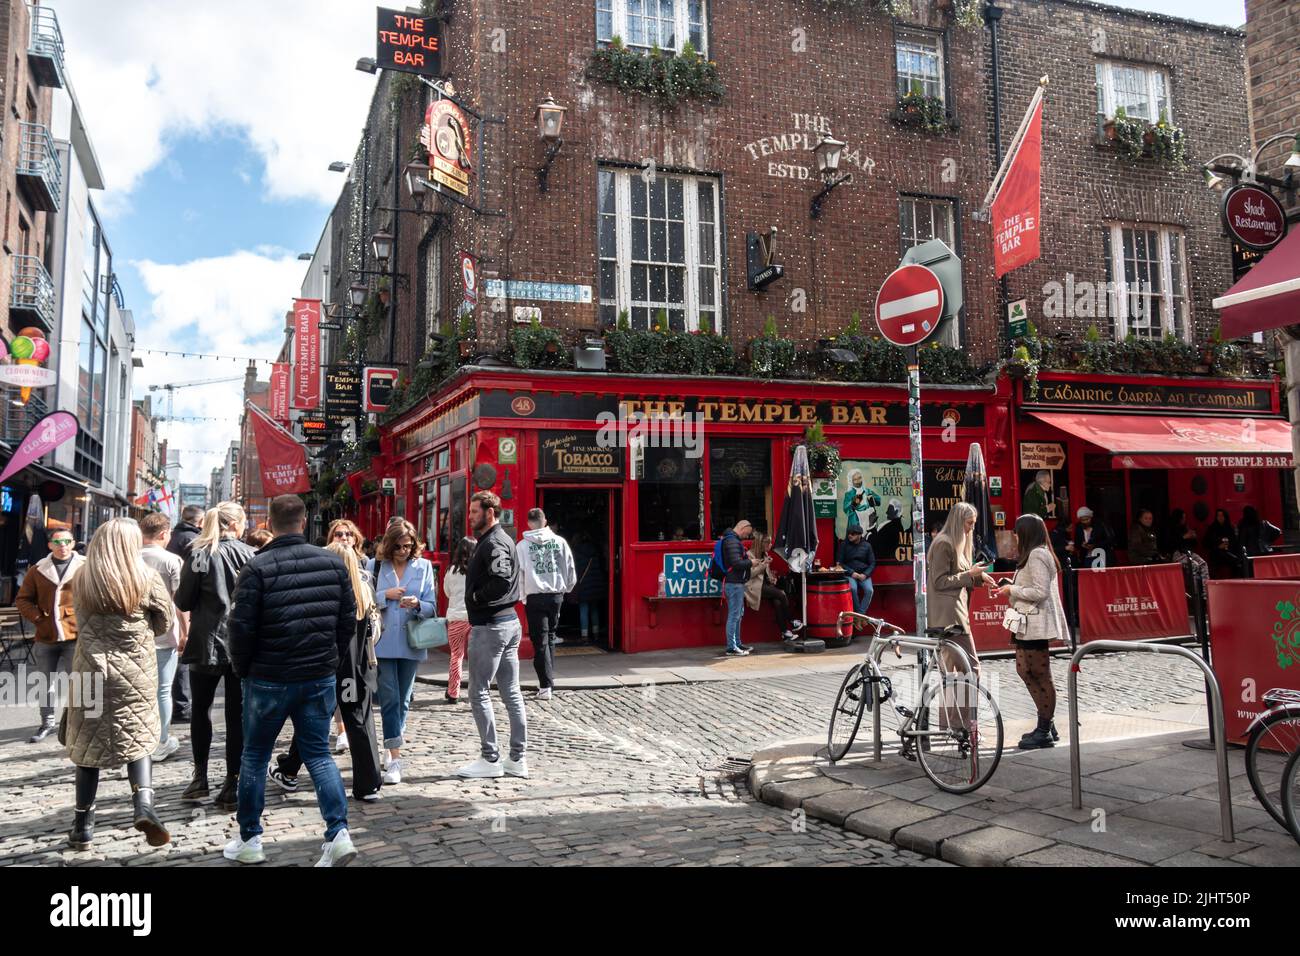 Dublin, Ireland - March 24, 2022: Crowds of tourists gather in Dublin's Temple Bar neighbourhood, a colourful downtown area of the city. Stock Photo